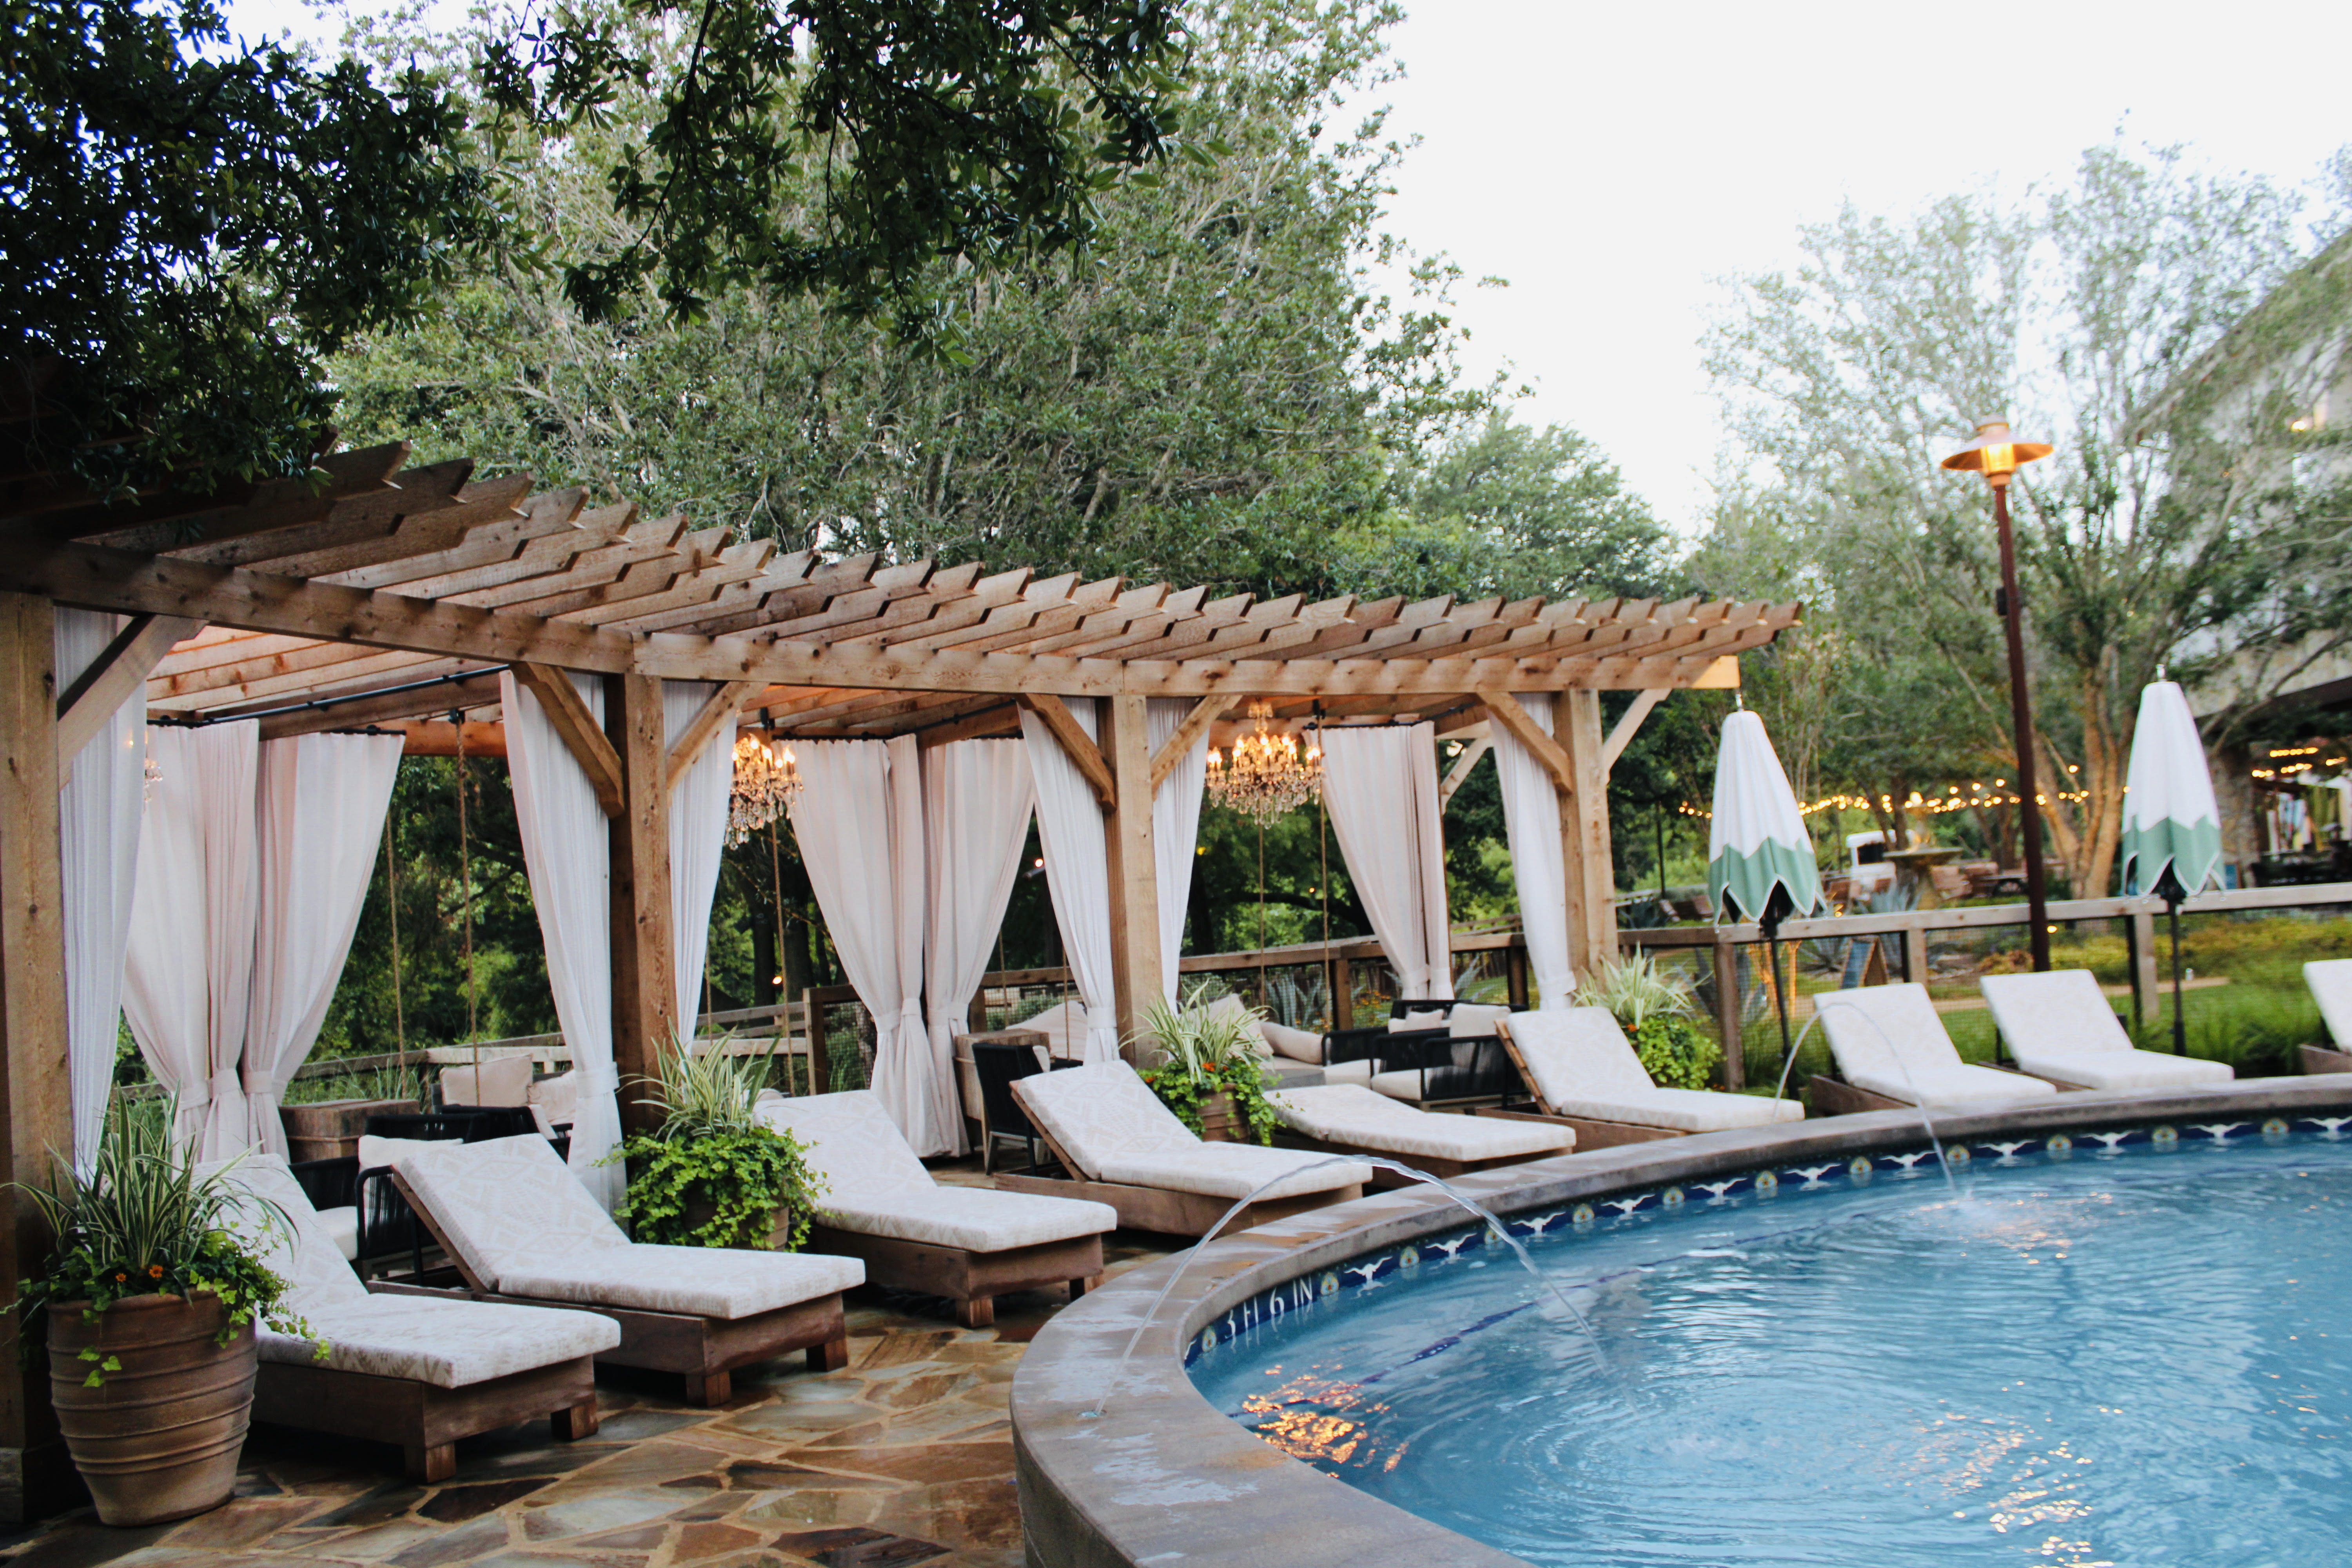 The pool with cabanas and crystal bronze chandeliers.